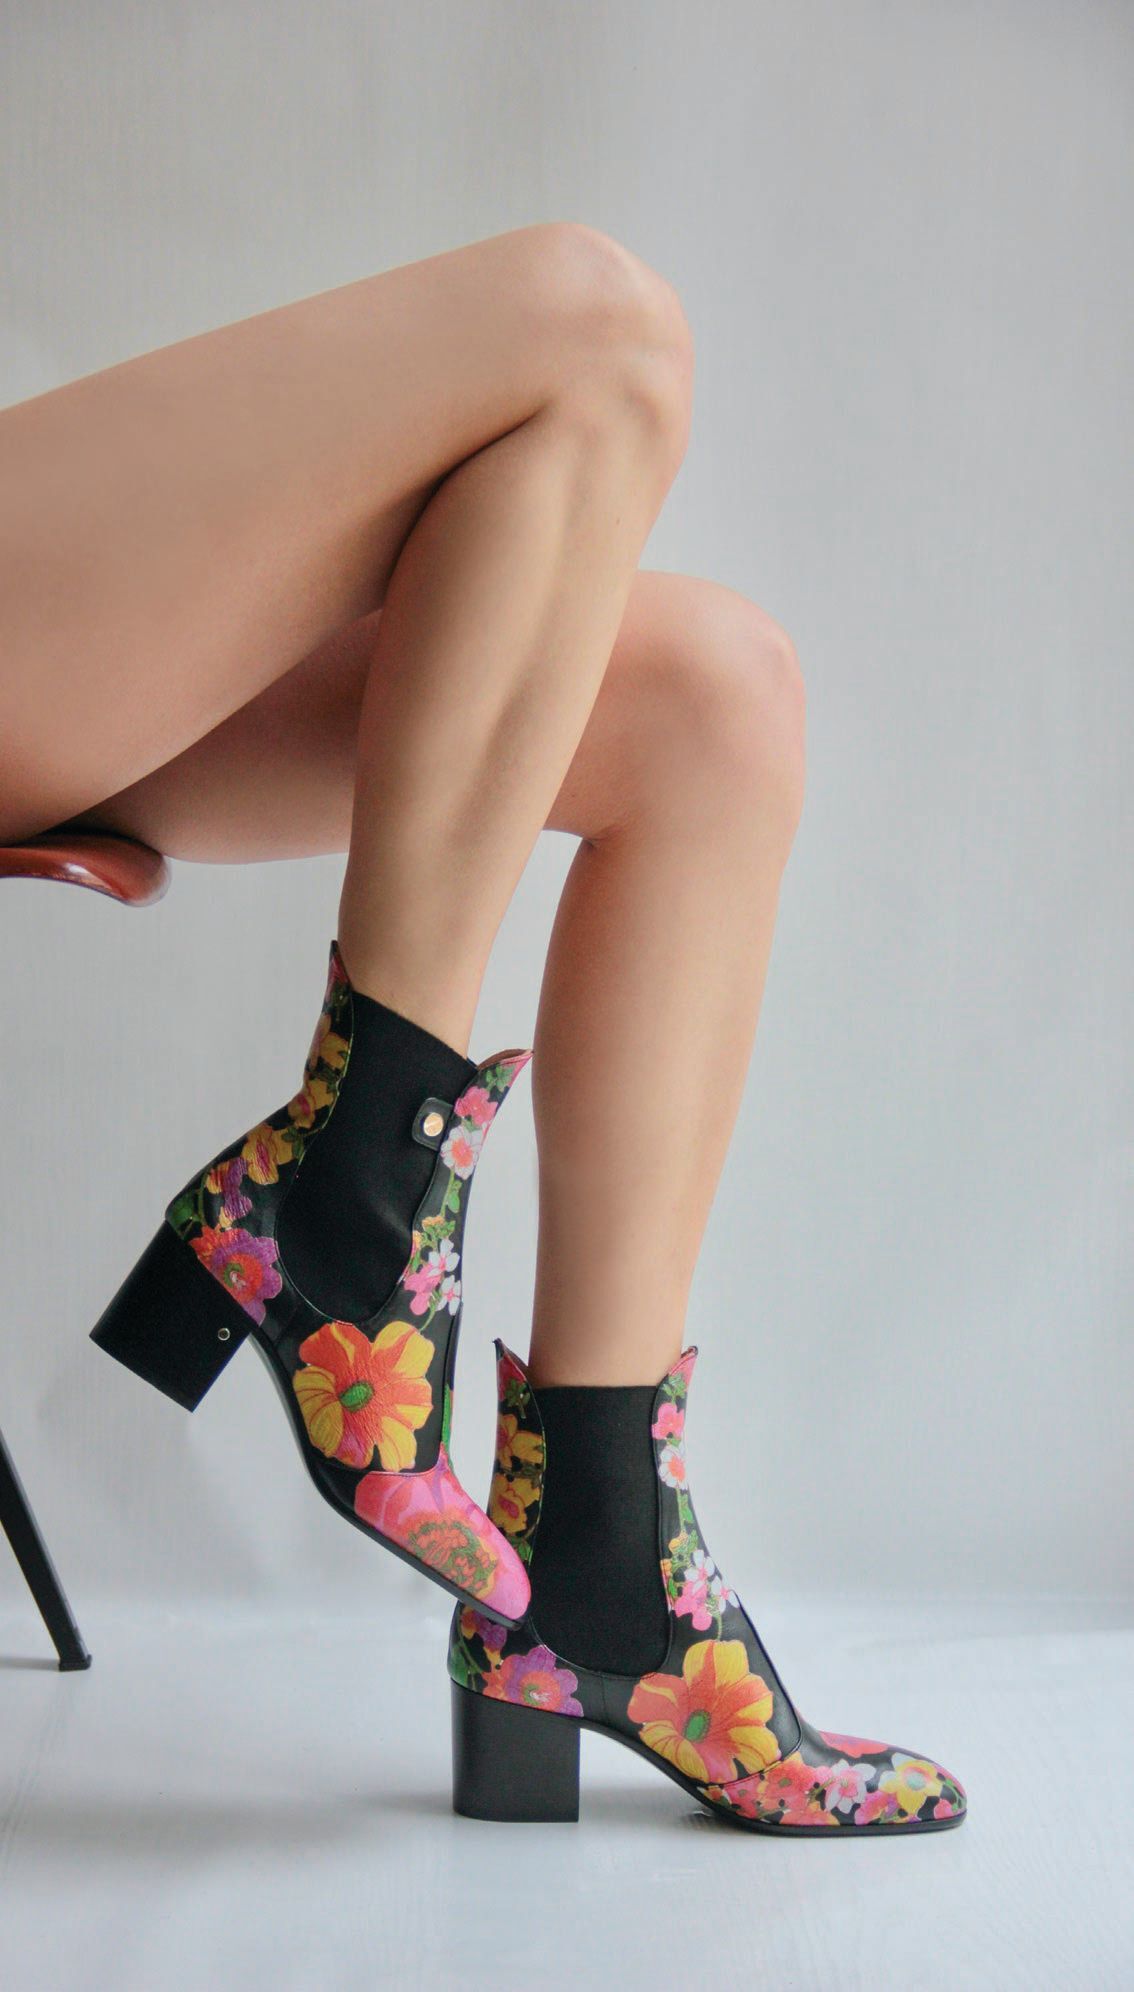 Laurence Dacade Angie glove boot with multicolor flowers SHOE PHOTOS BY DAVID MARGUET